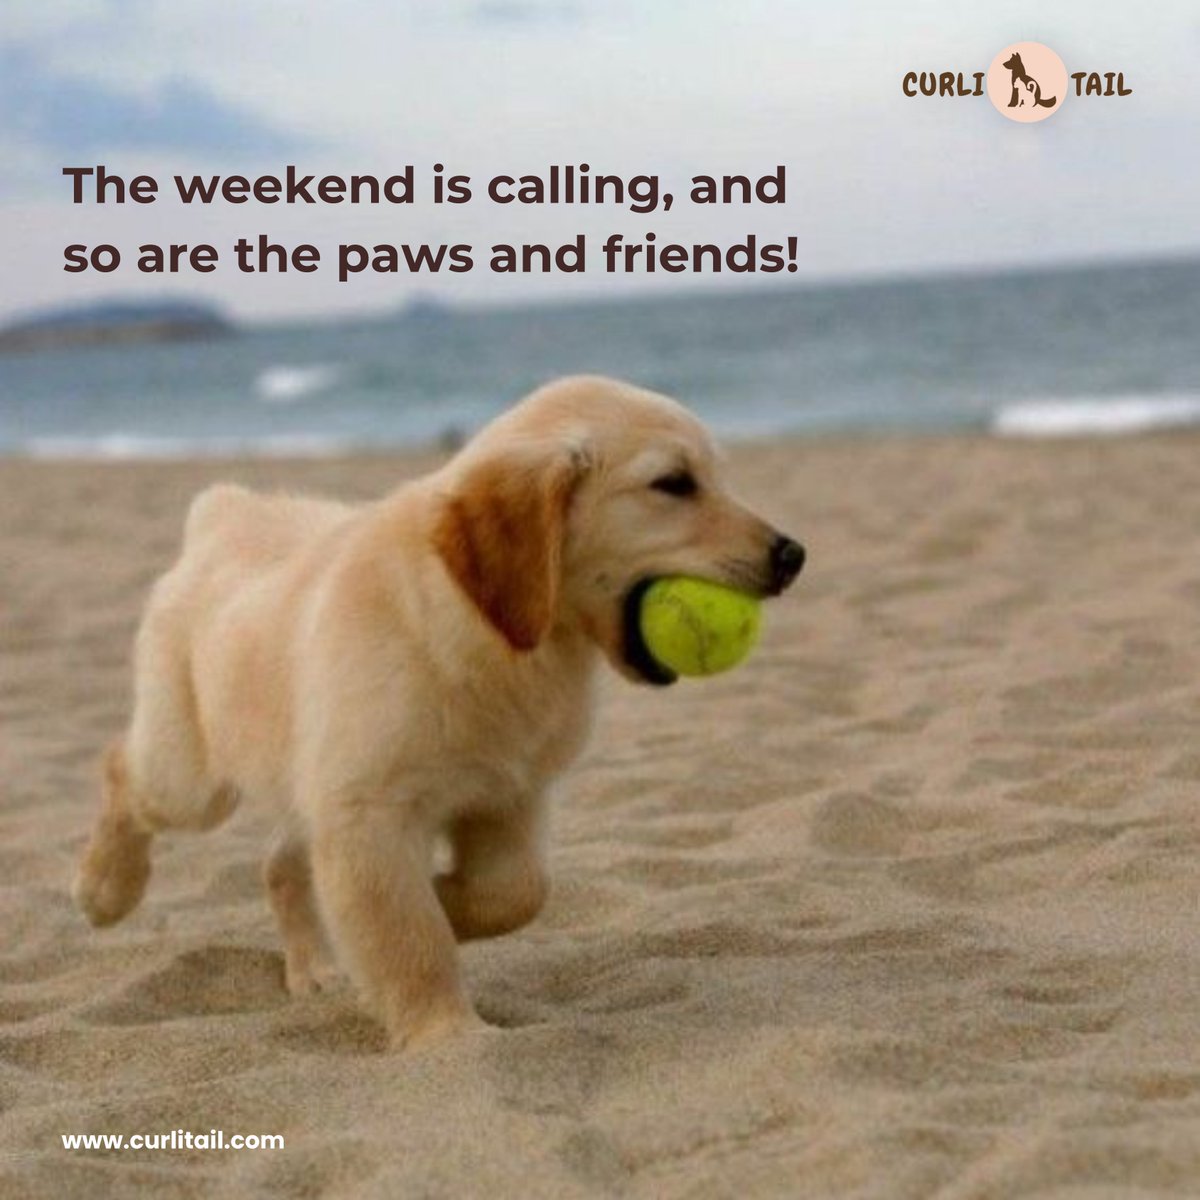 🎊 Embrace the Friday vibes, leave work behind, and dive into the joy of spending quality time with furry companions and dear friends. 🐾❤️ #WeekendFun #PawsAndPals